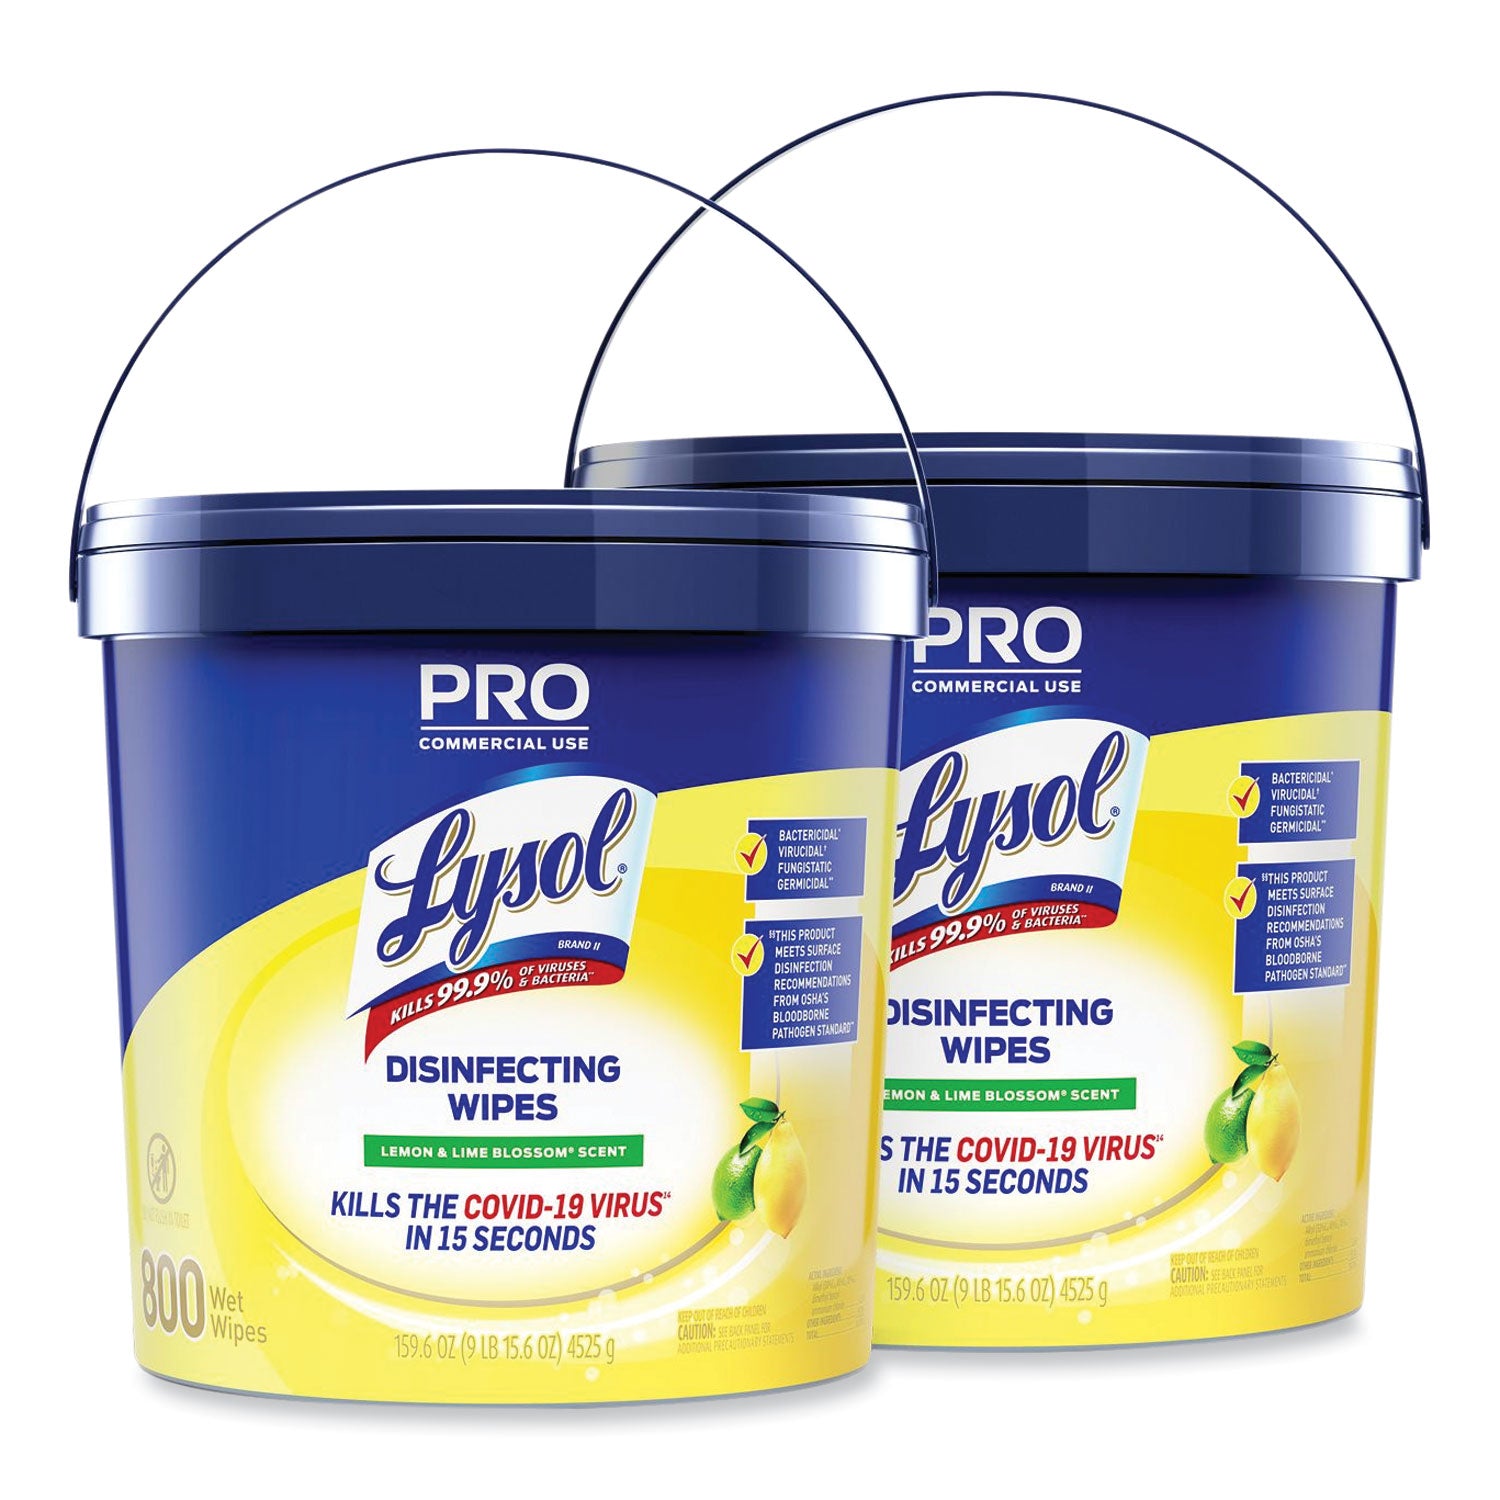 professional-disinfecting-wipe-bucket-1-ply-6-x-8-lemon-and-lime-blossom-white-800-wipes-bucket-2-buckets-carton_rac99856ct - 2